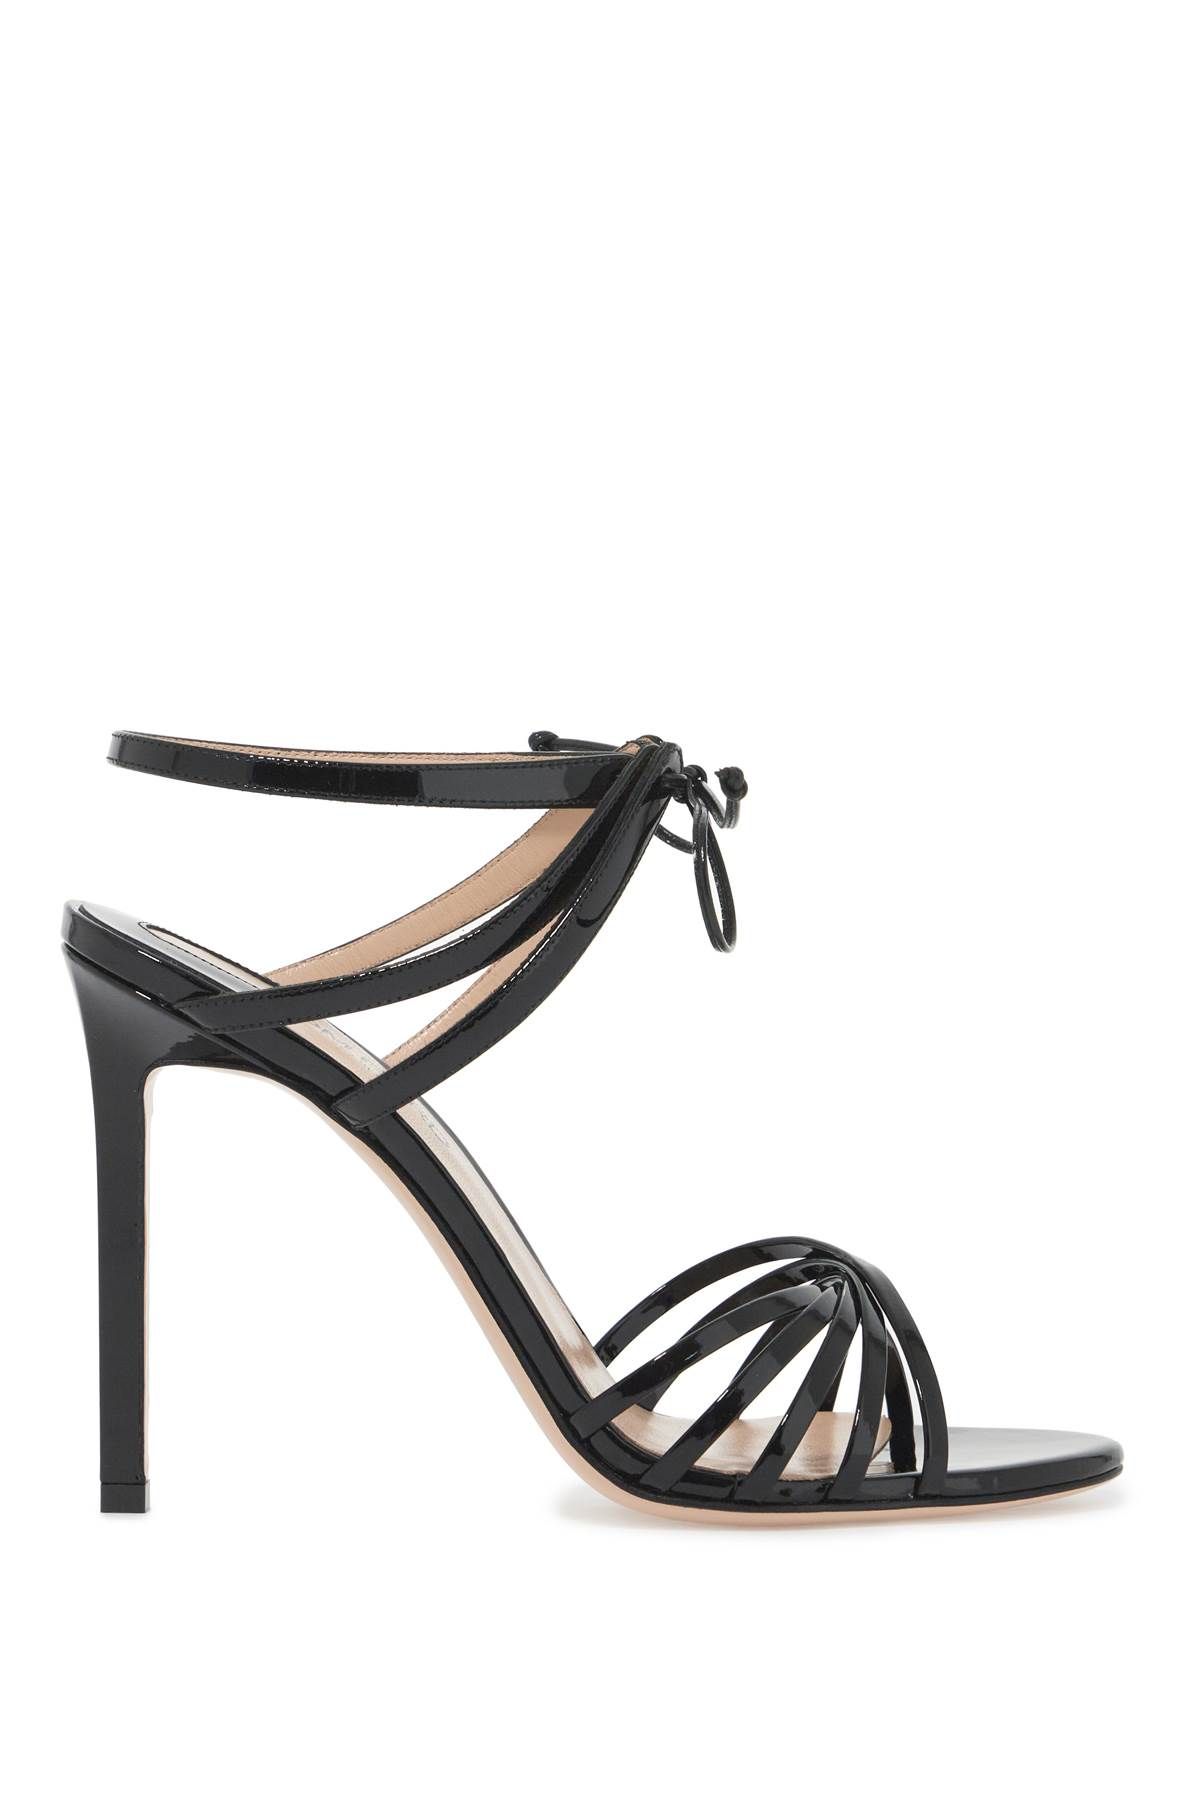 Tom Ford TOM FORD glossy sandals with criss-cross